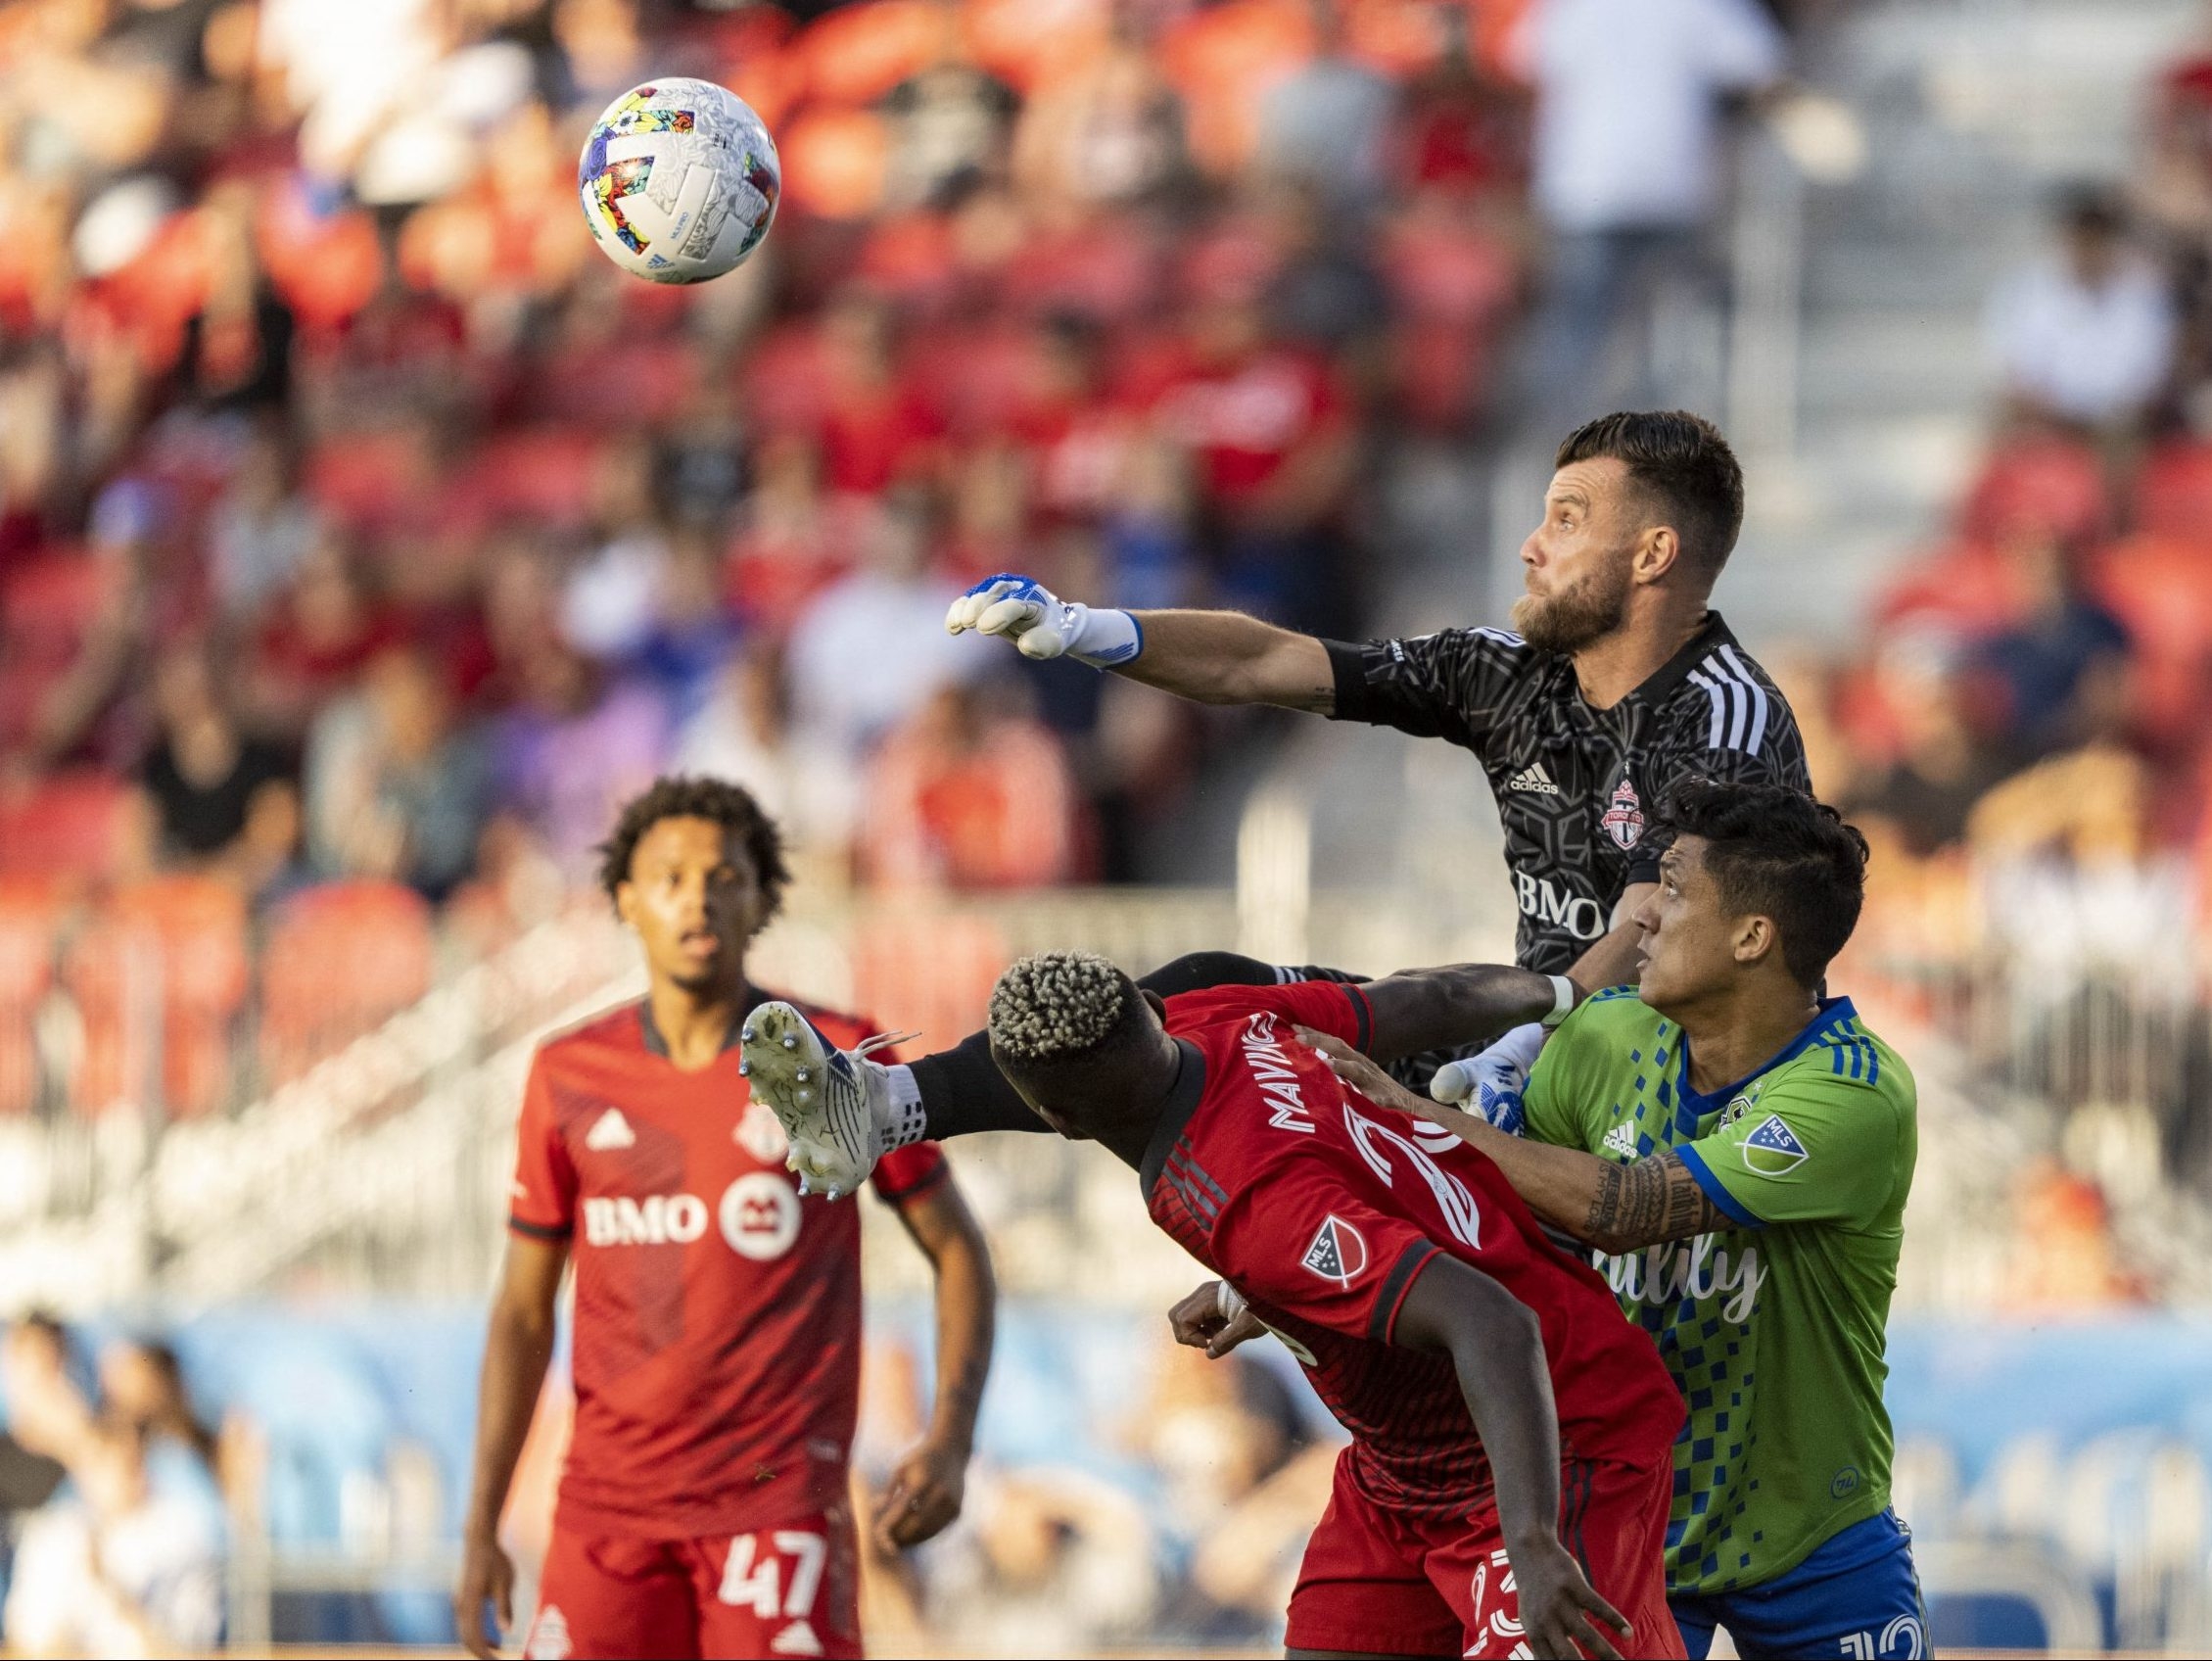 Toronto FC loses second in a row, falling to the Seattle Sounders 2-0